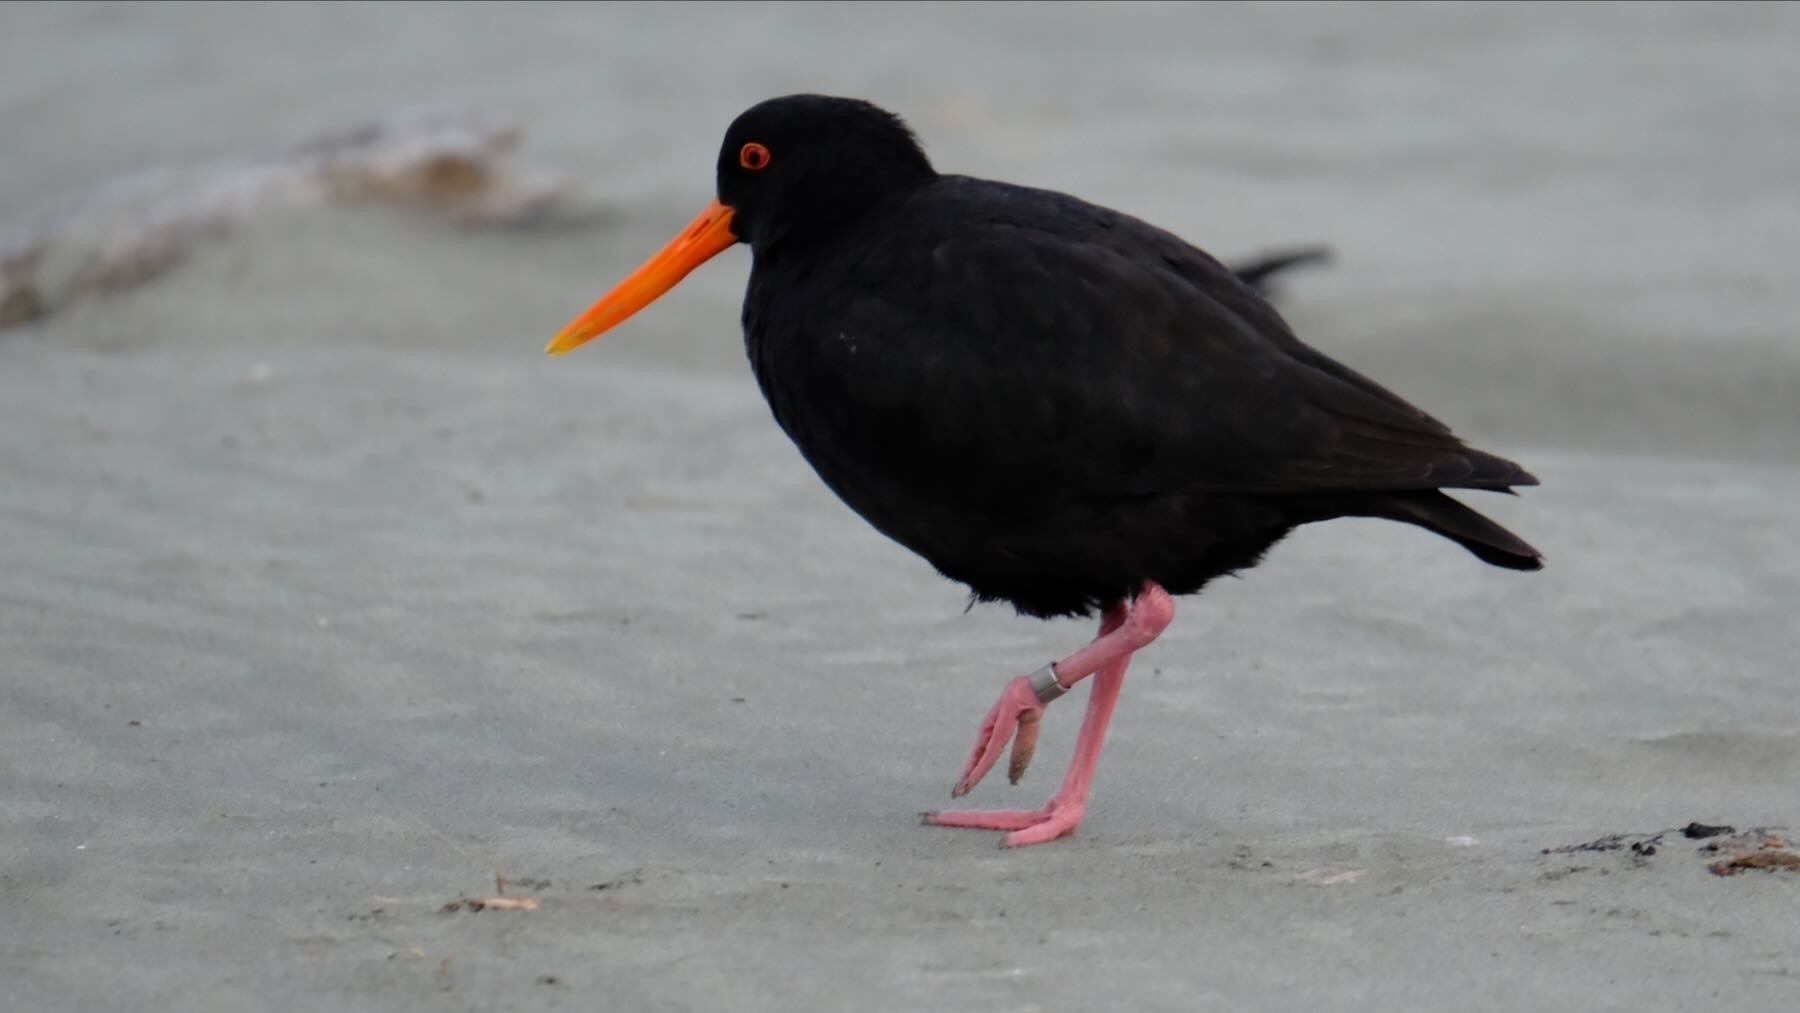 One of the nesting Oystercatchers has a band on its left leg. 